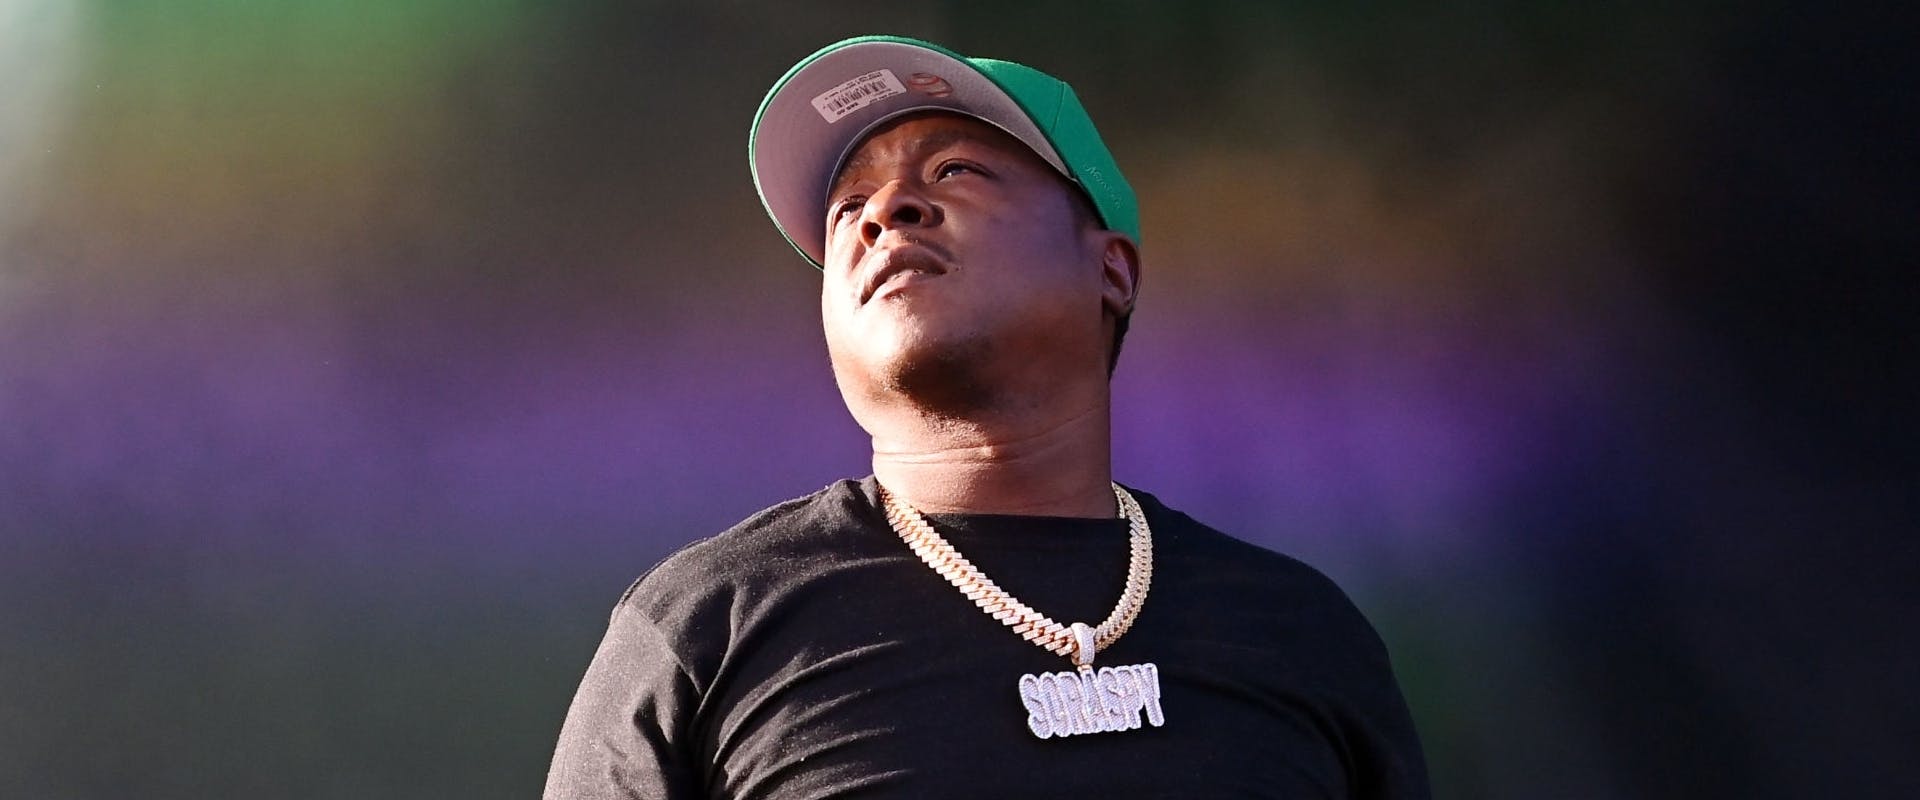 Rapper Jadakiss of The LOX performs onstage during day 2 of 2021 ONE Musicfest at Centennial Olympic Park on October 10, 2021 in Atlanta, Georgia.